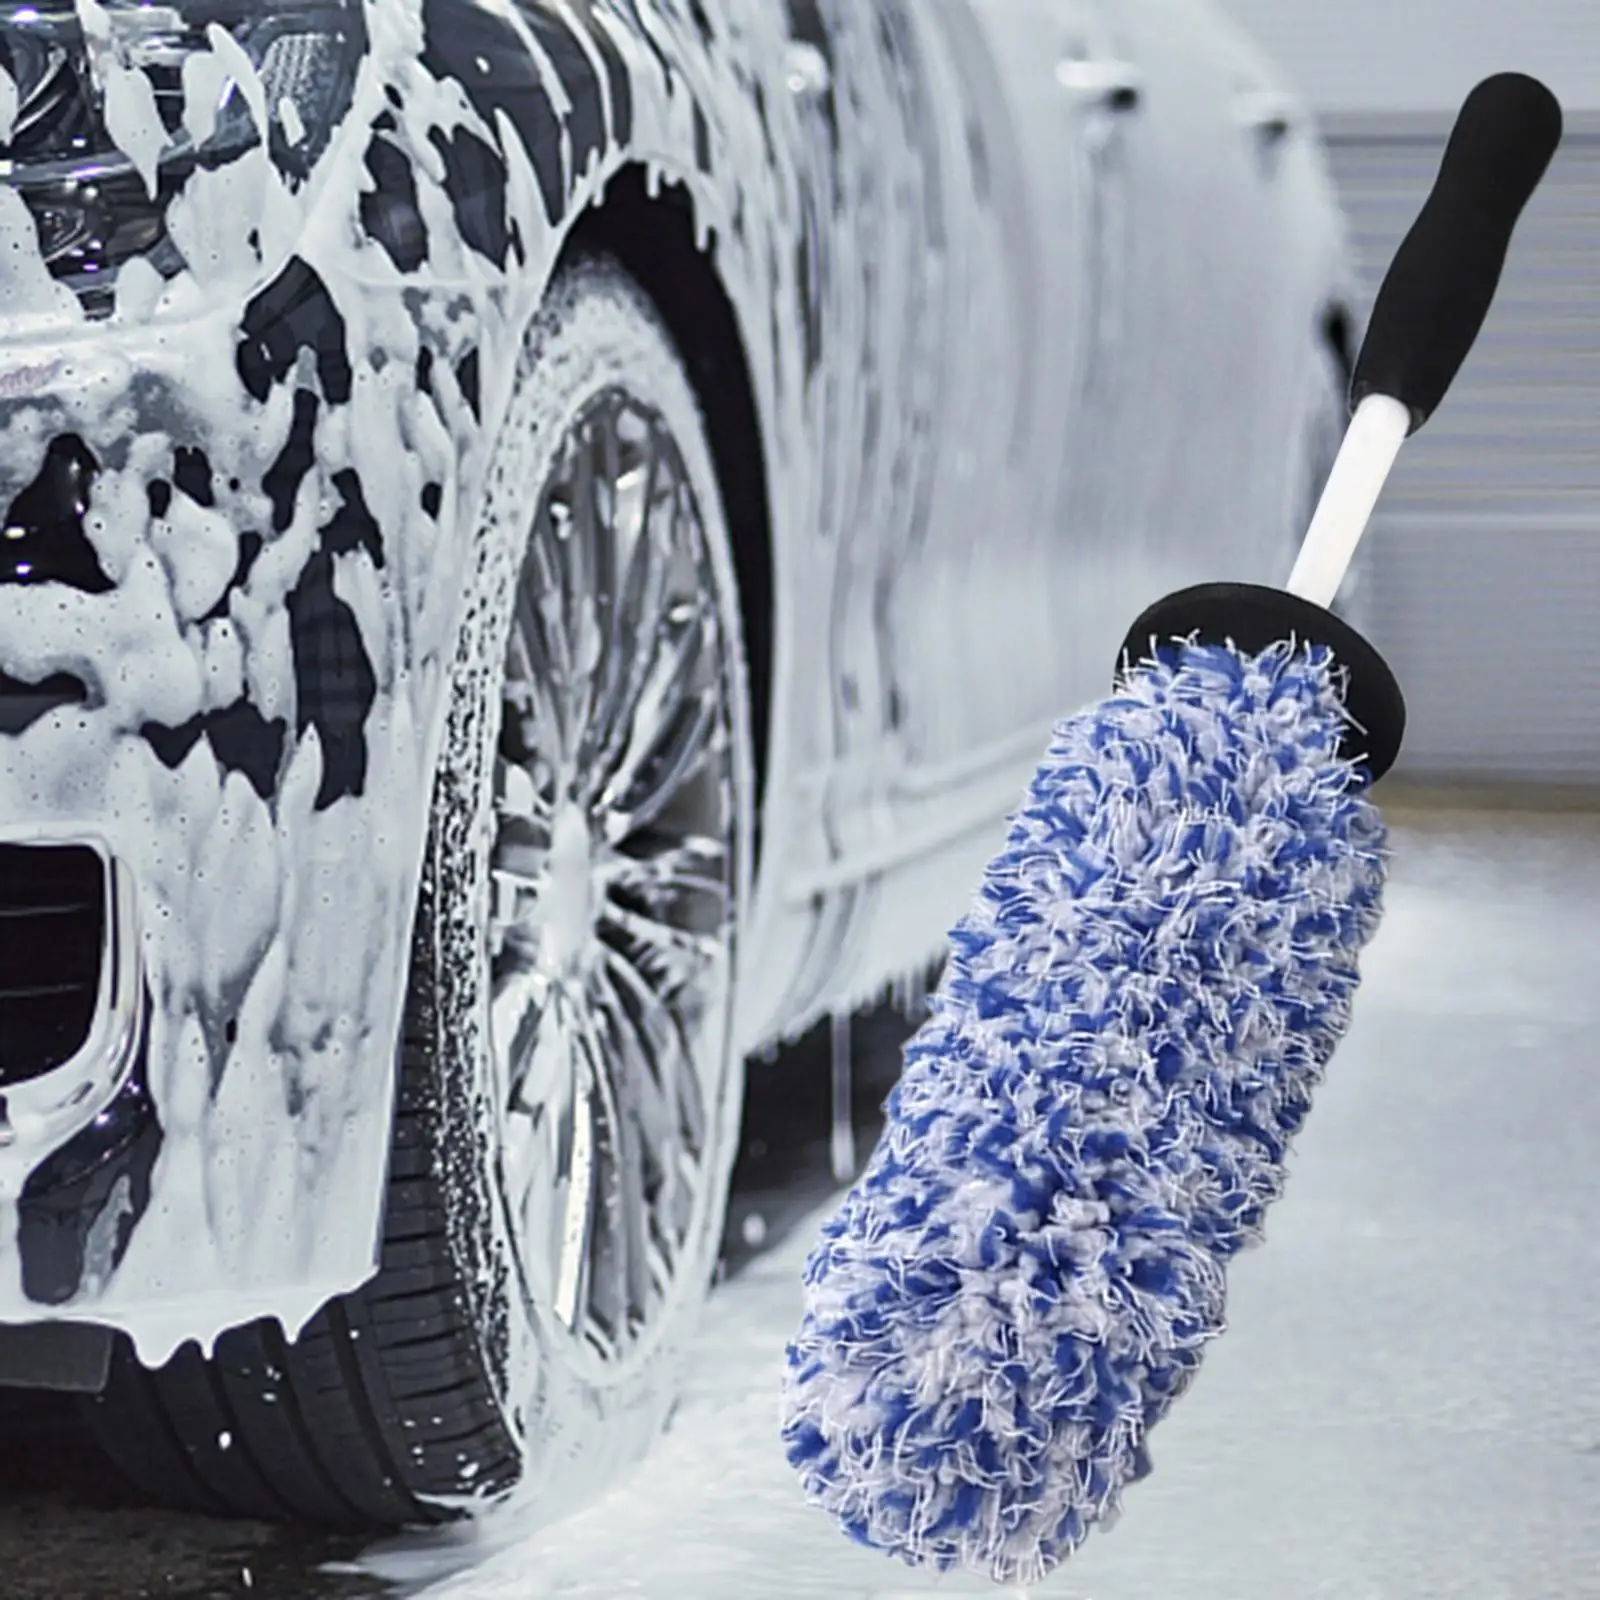 Car Wheel Rim Cleaning Brush Car Cleaning Supplies Universal Wheel Brush Cleaning Tool for Car Wheel Hub Rims Tires Tire